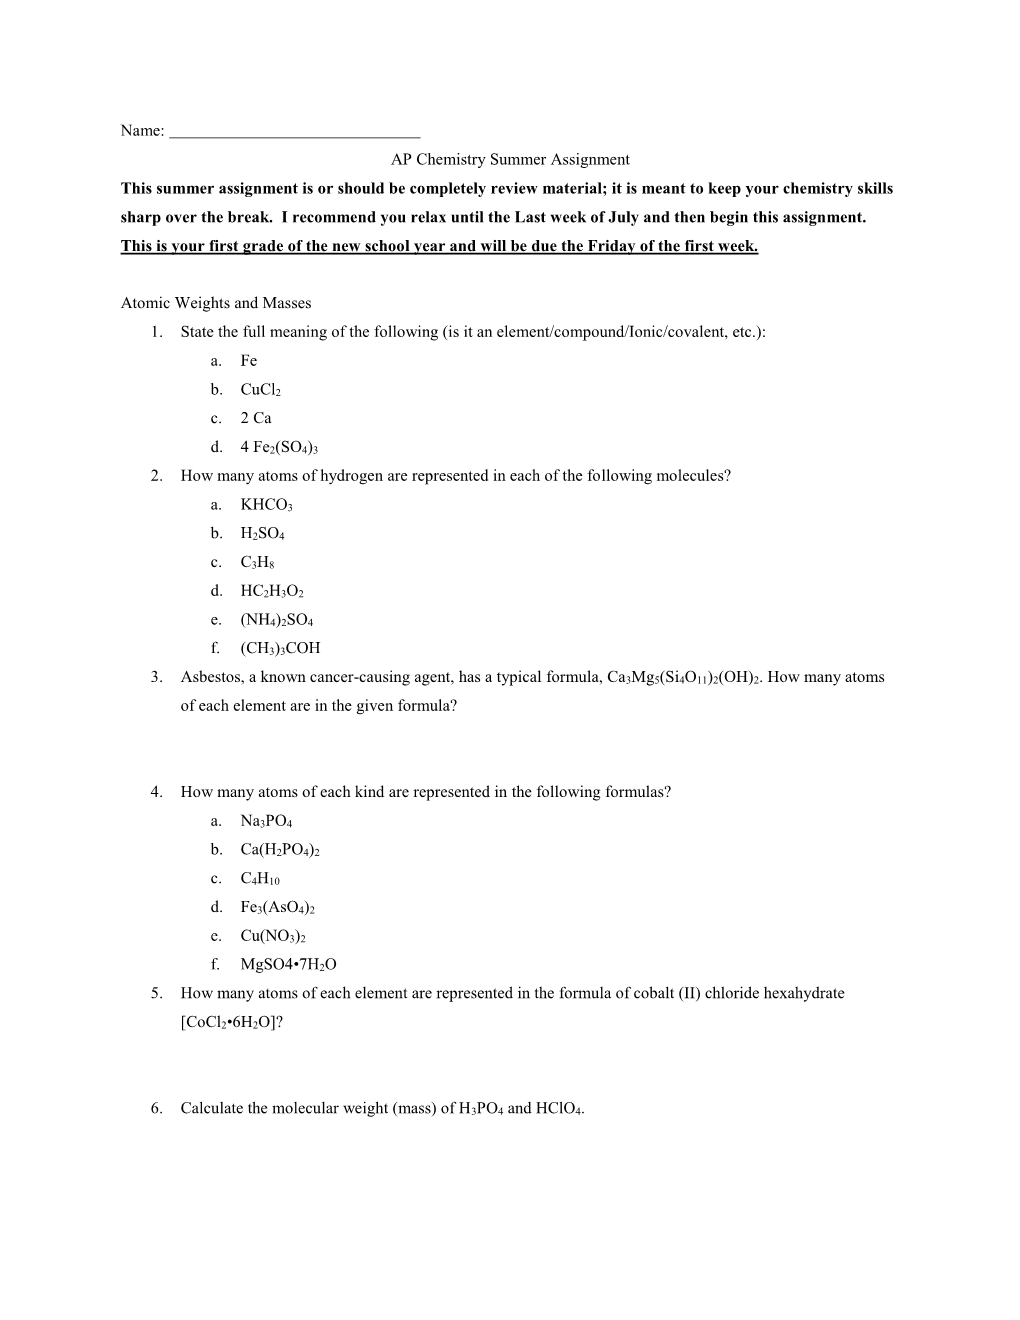 AP Chemistry Summer Assignment.Pdf